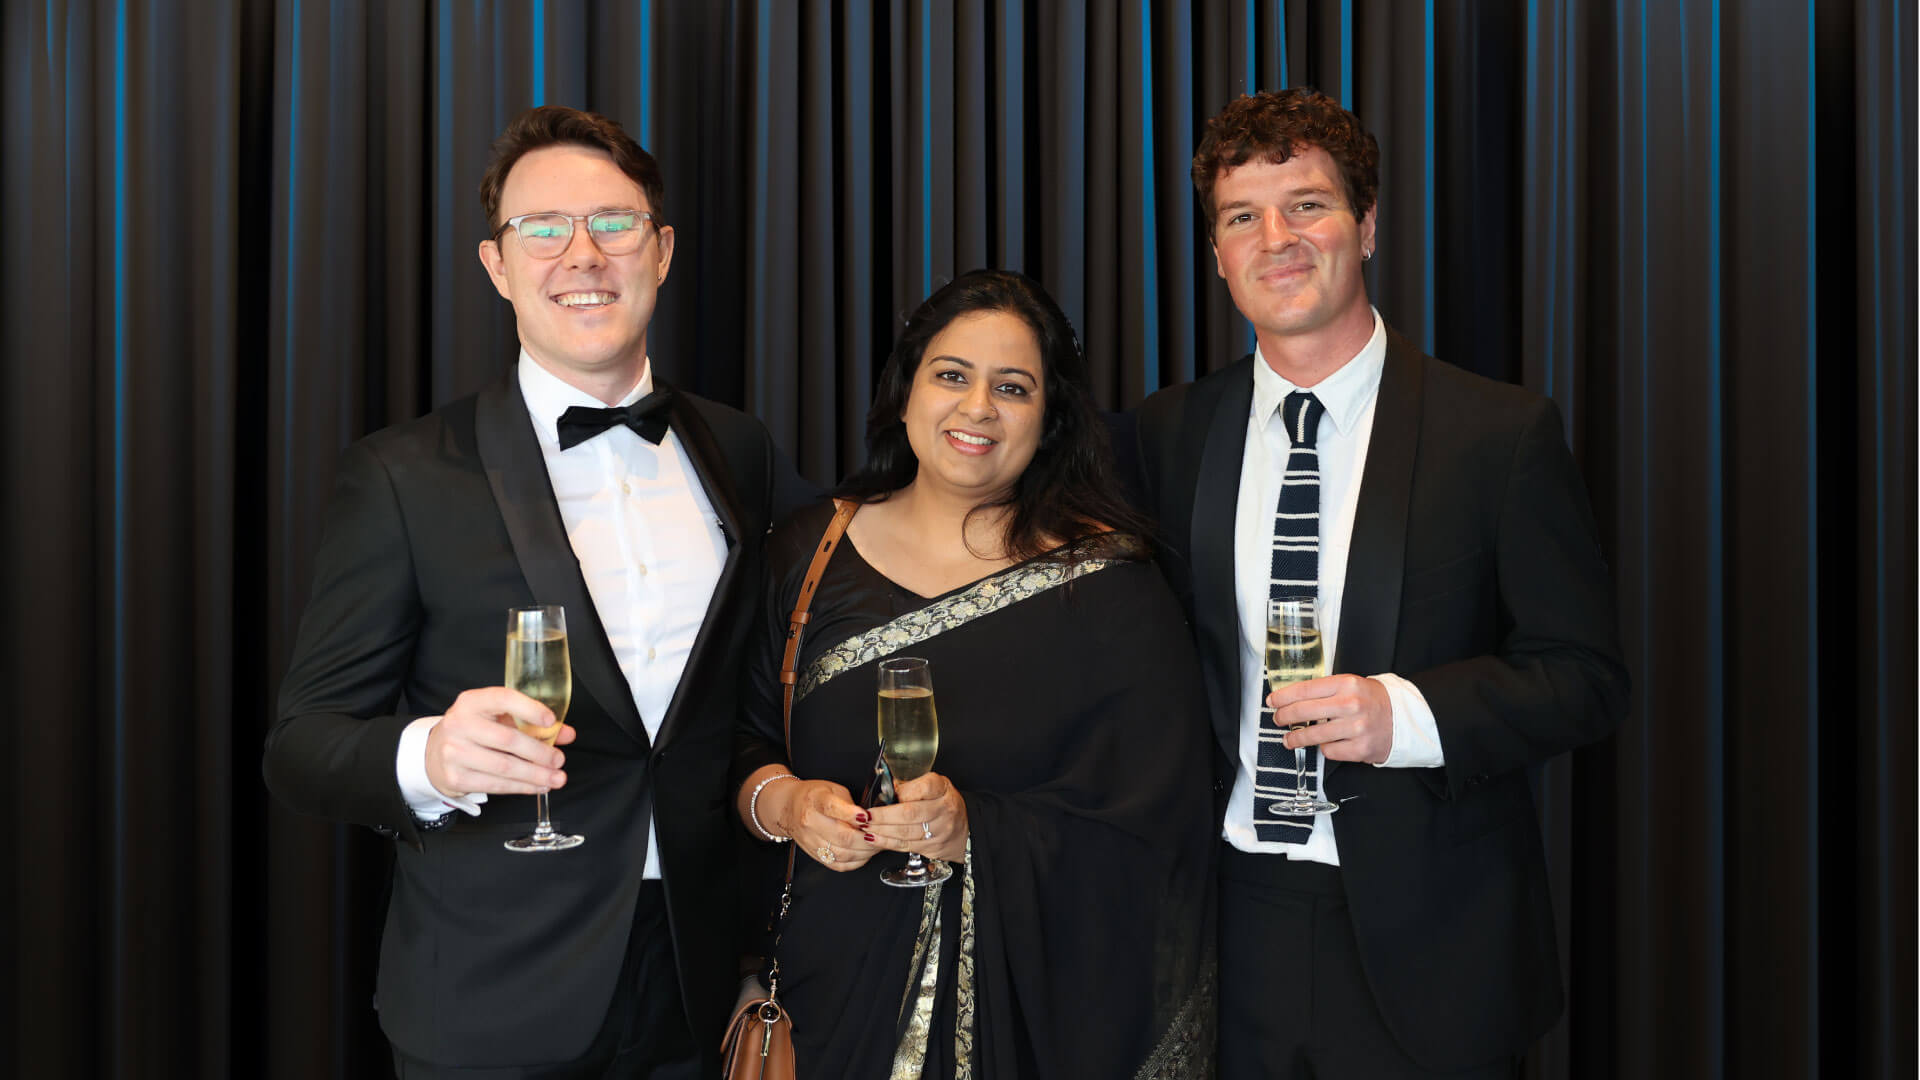 The winning Sydney Opera House team stood in front of a curtain at the Acquia Engage Awards 2023. They are dressed in formal black tie and holding champagne glasses.